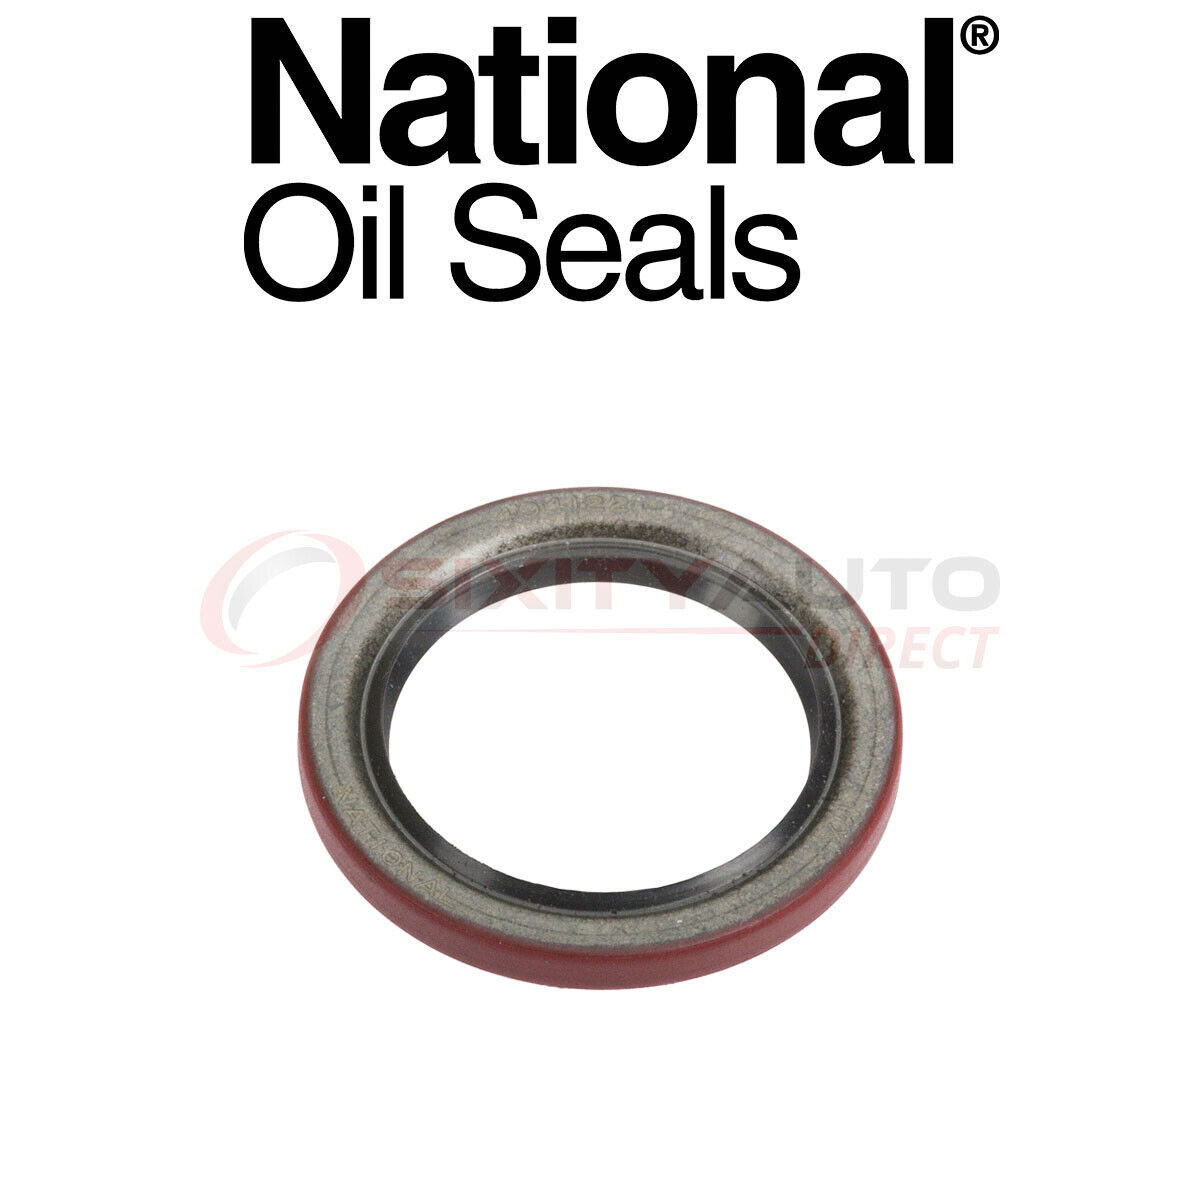 National Wheel Seal for 1983-1989 Mitsubishi Starion 2.6L L4 - Axle Hub Tire zd